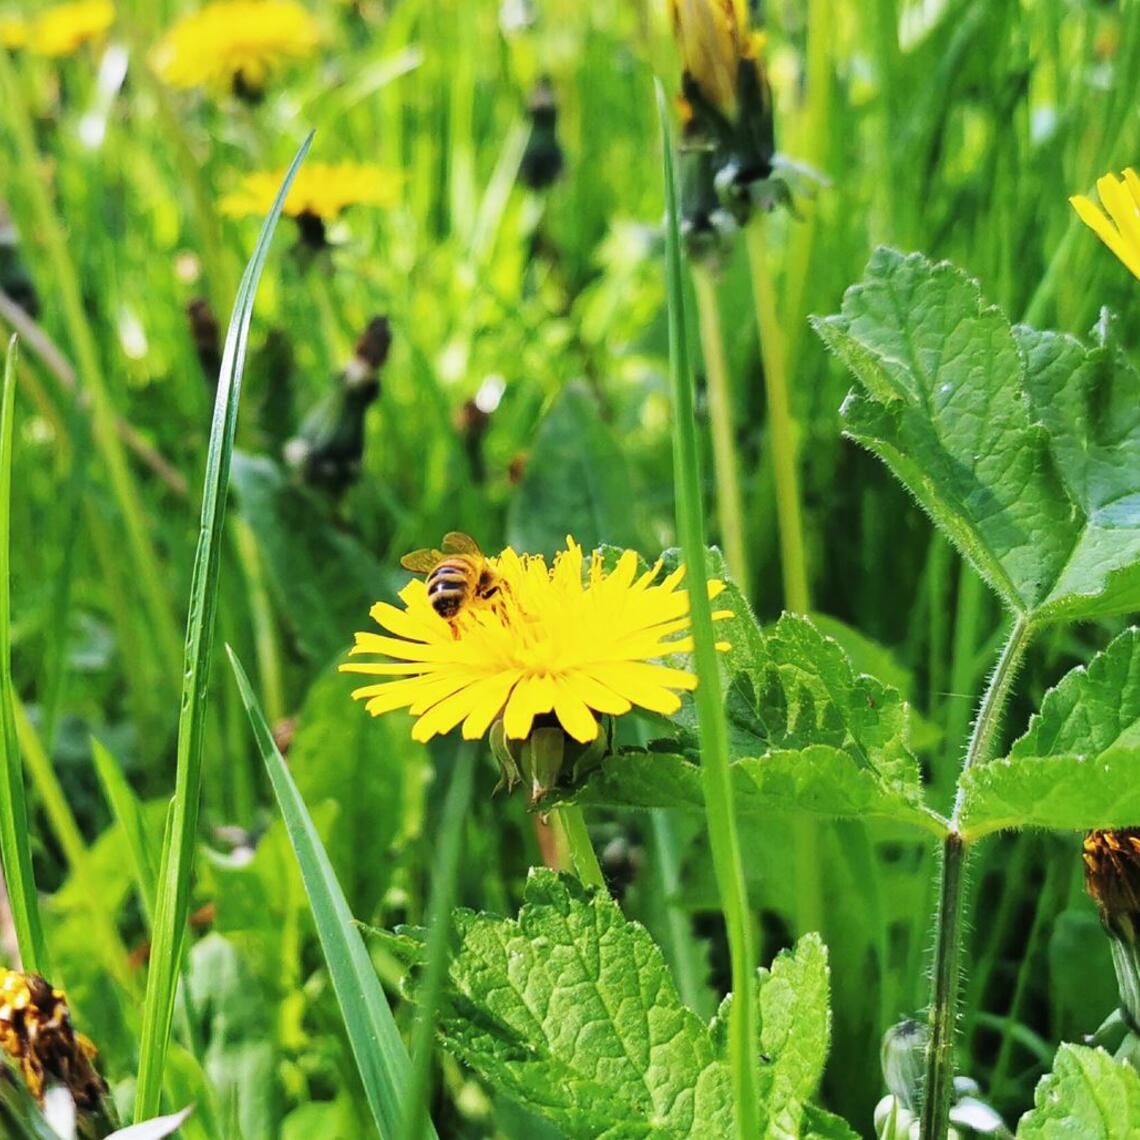 Close up of bee sitting on dandelion flower in field of grass